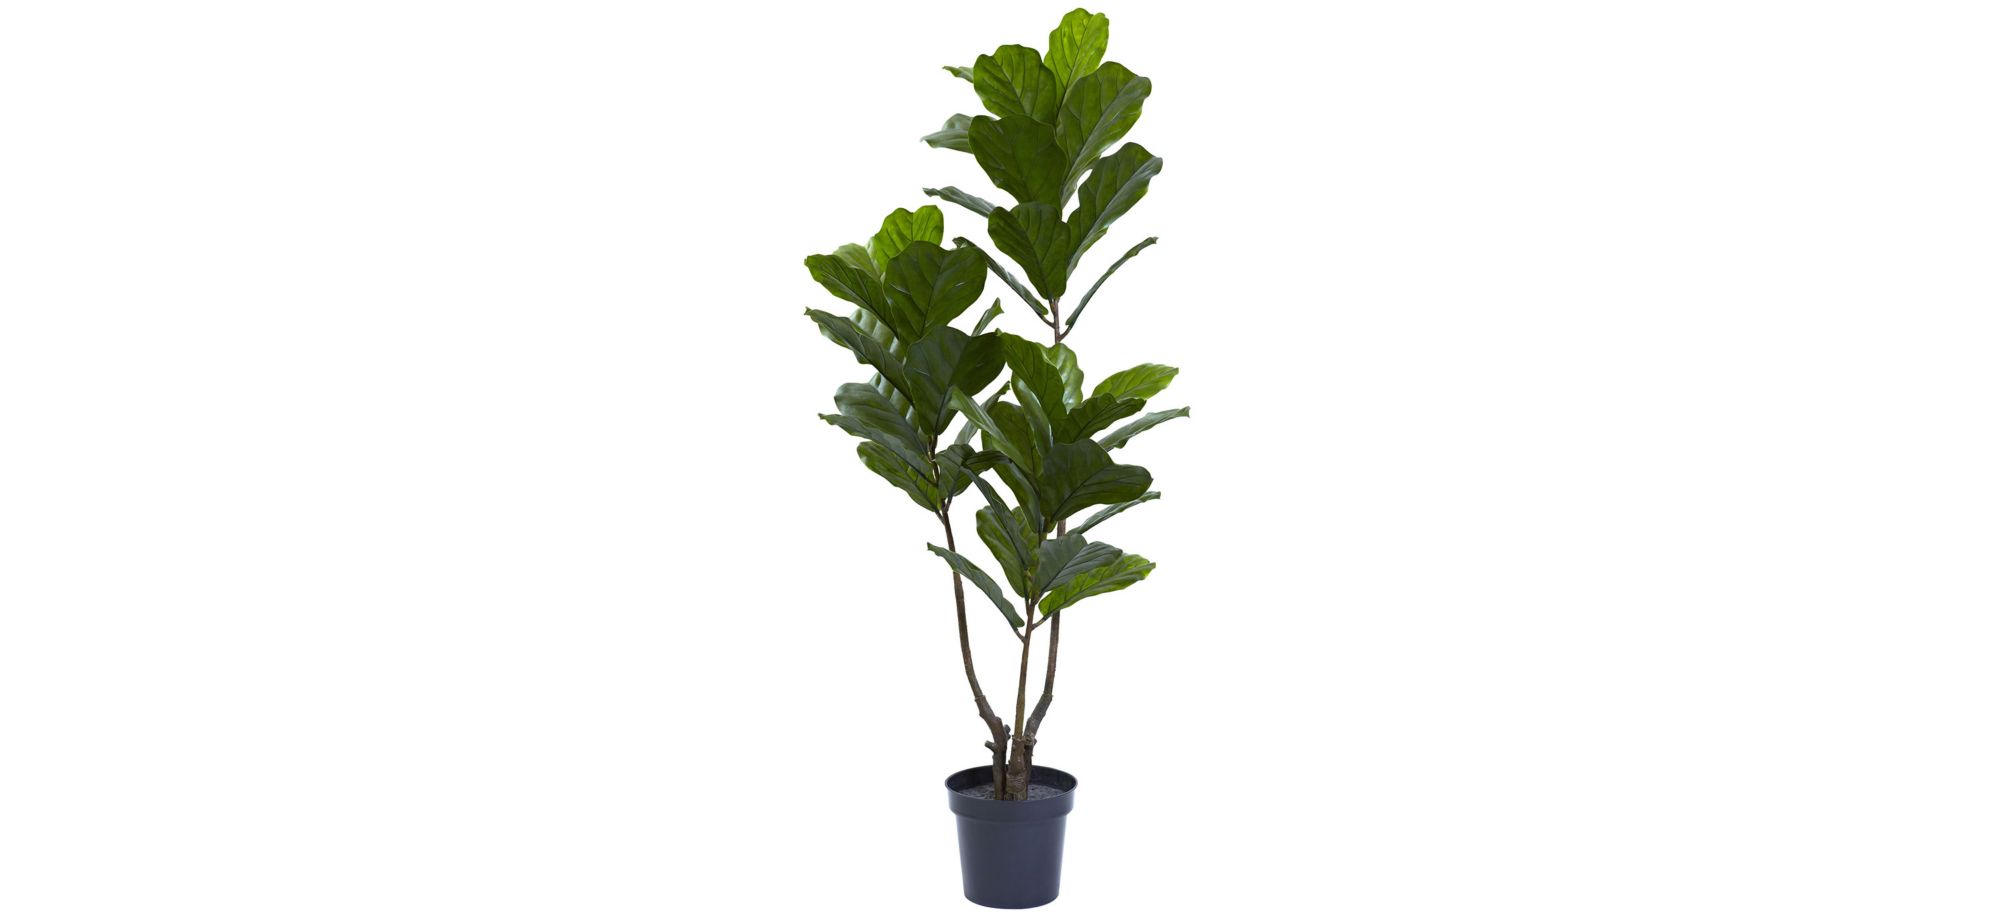 Fiddle Leaf Artificial Tree (Indoor/Outdoor) in Green by Bellanest